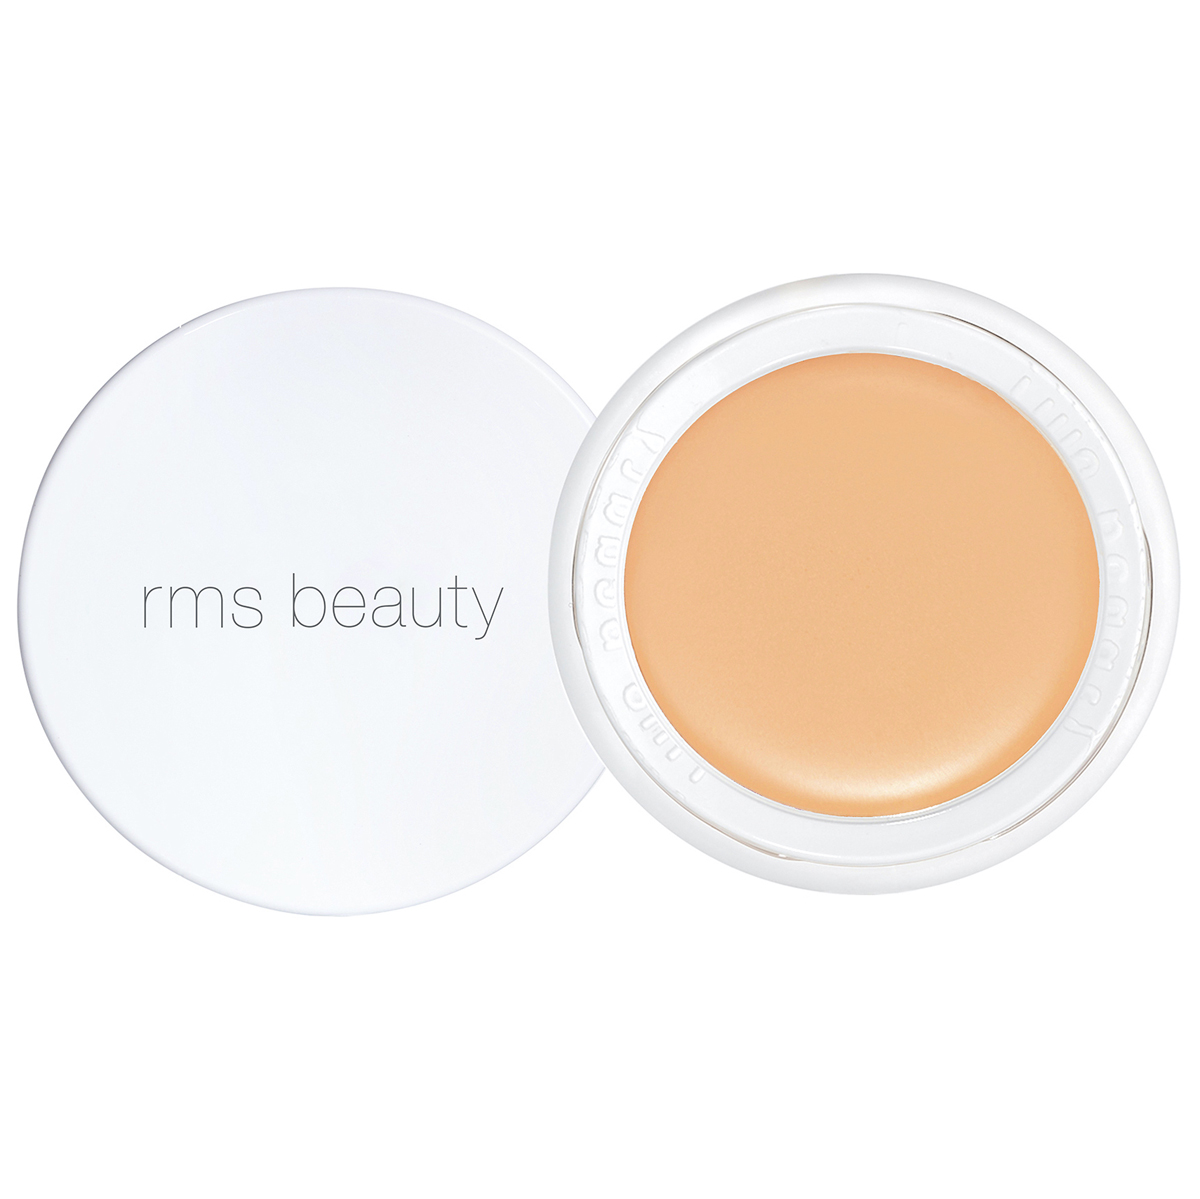 rms beauty un cover up vs. glossier stretch concealer